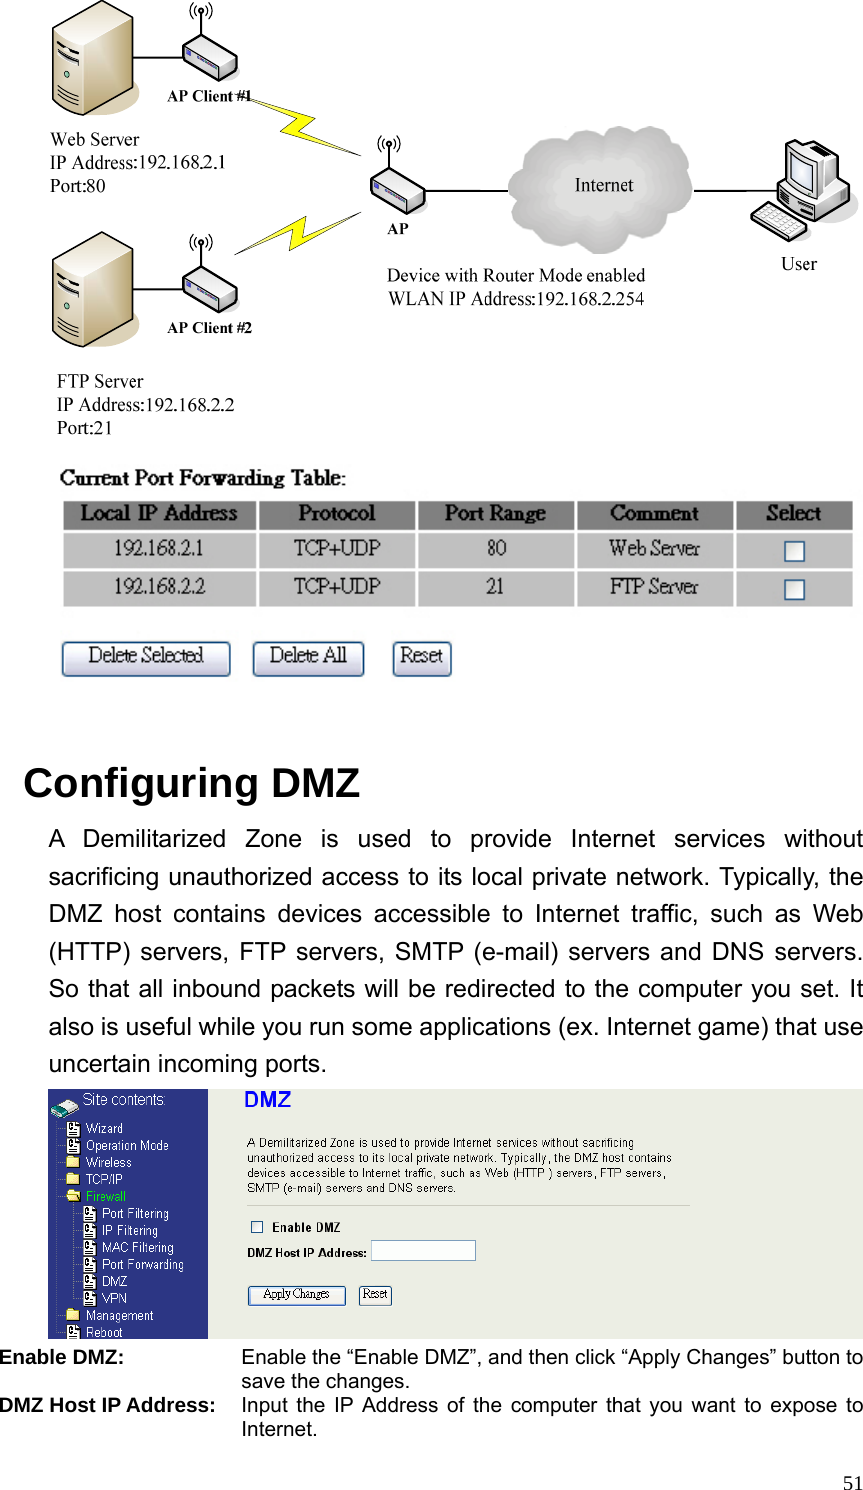  51   Configuring DMZ A Demilitarized Zone is used to provide Internet services without sacrificing unauthorized access to its local private network. Typically, the DMZ host contains devices accessible to Internet traffic, such as Web (HTTP) servers, FTP servers, SMTP (e-mail) servers and DNS servers. So that all inbound packets will be redirected to the computer you set. It also is useful while you run some applications (ex. Internet game) that use uncertain incoming ports.  Enable DMZ: Enable the “Enable DMZ”, and then click “Apply Changes” button to save the changes. DMZ Host IP Address: Input the IP Address of the computer that you want to expose to Internet. 